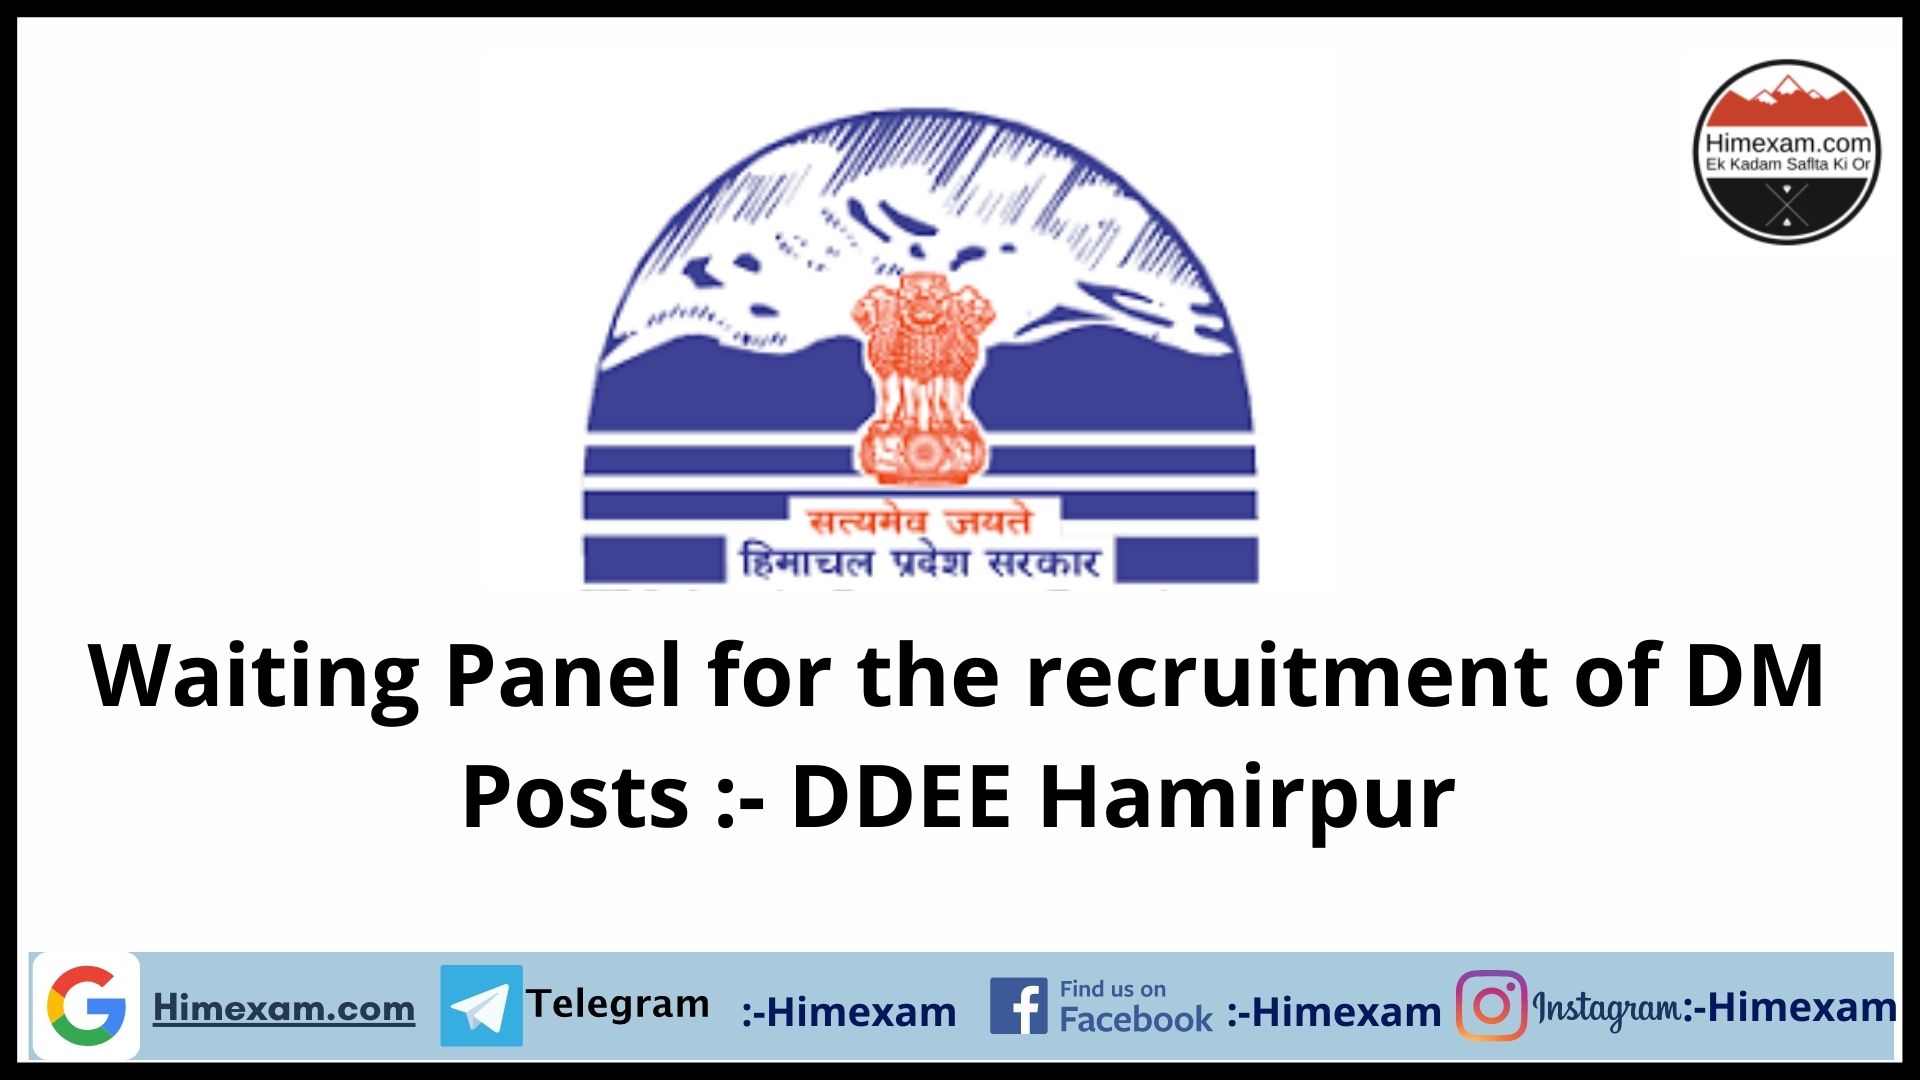 Waiting Panel for the recruitment of DM Posts :- DDEE Hamirpur